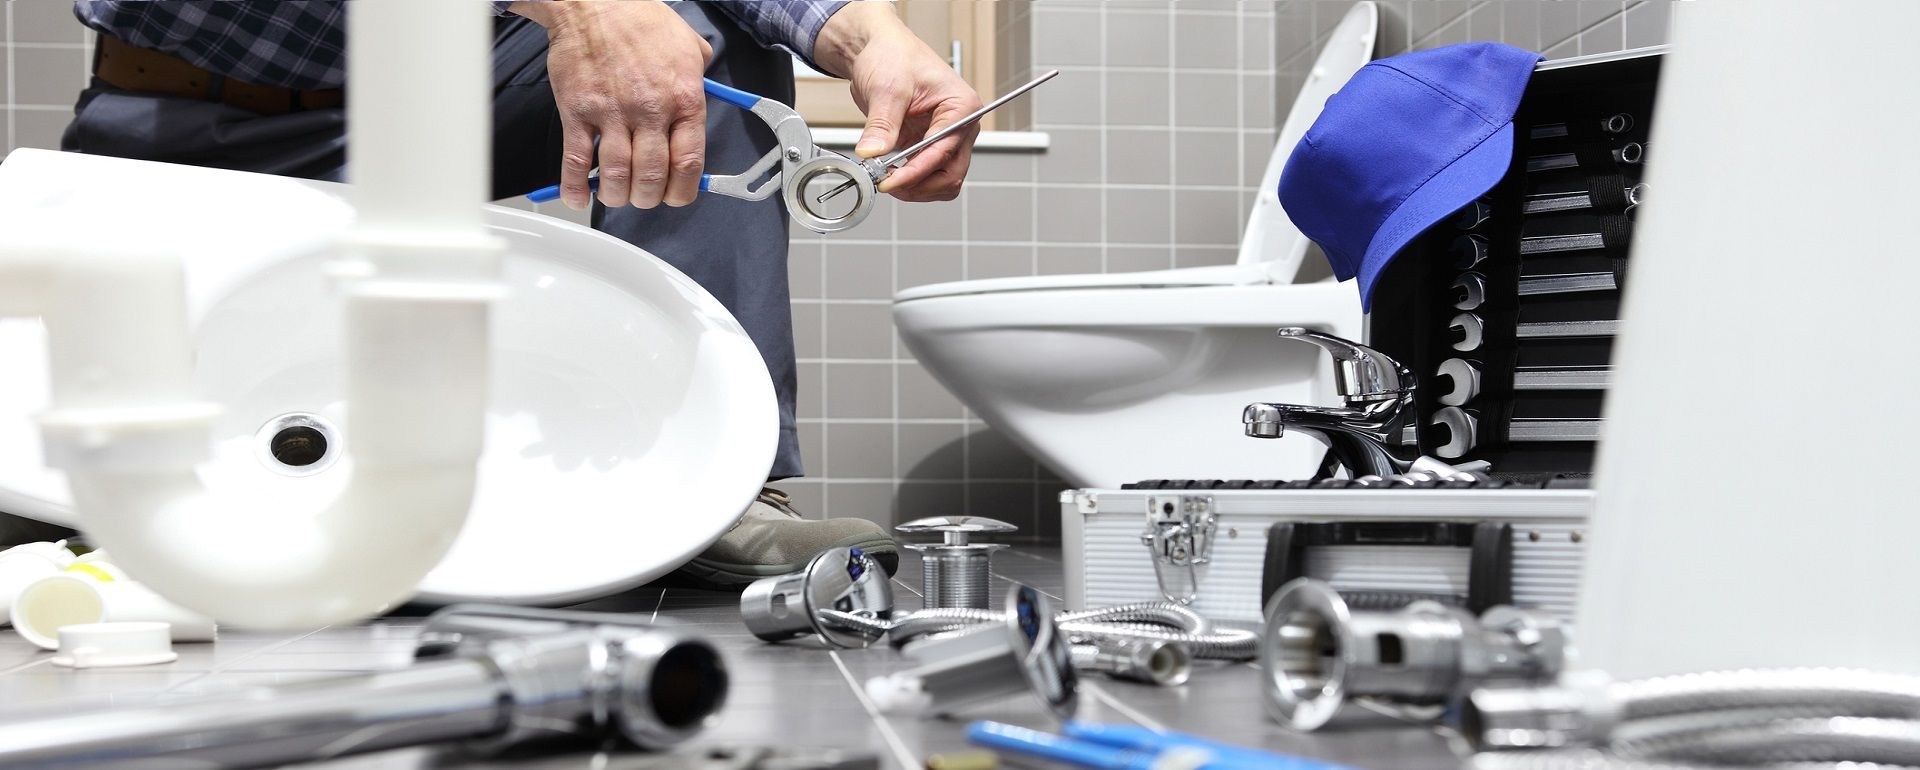 Toilet Replacement Services in Johns Creek GA